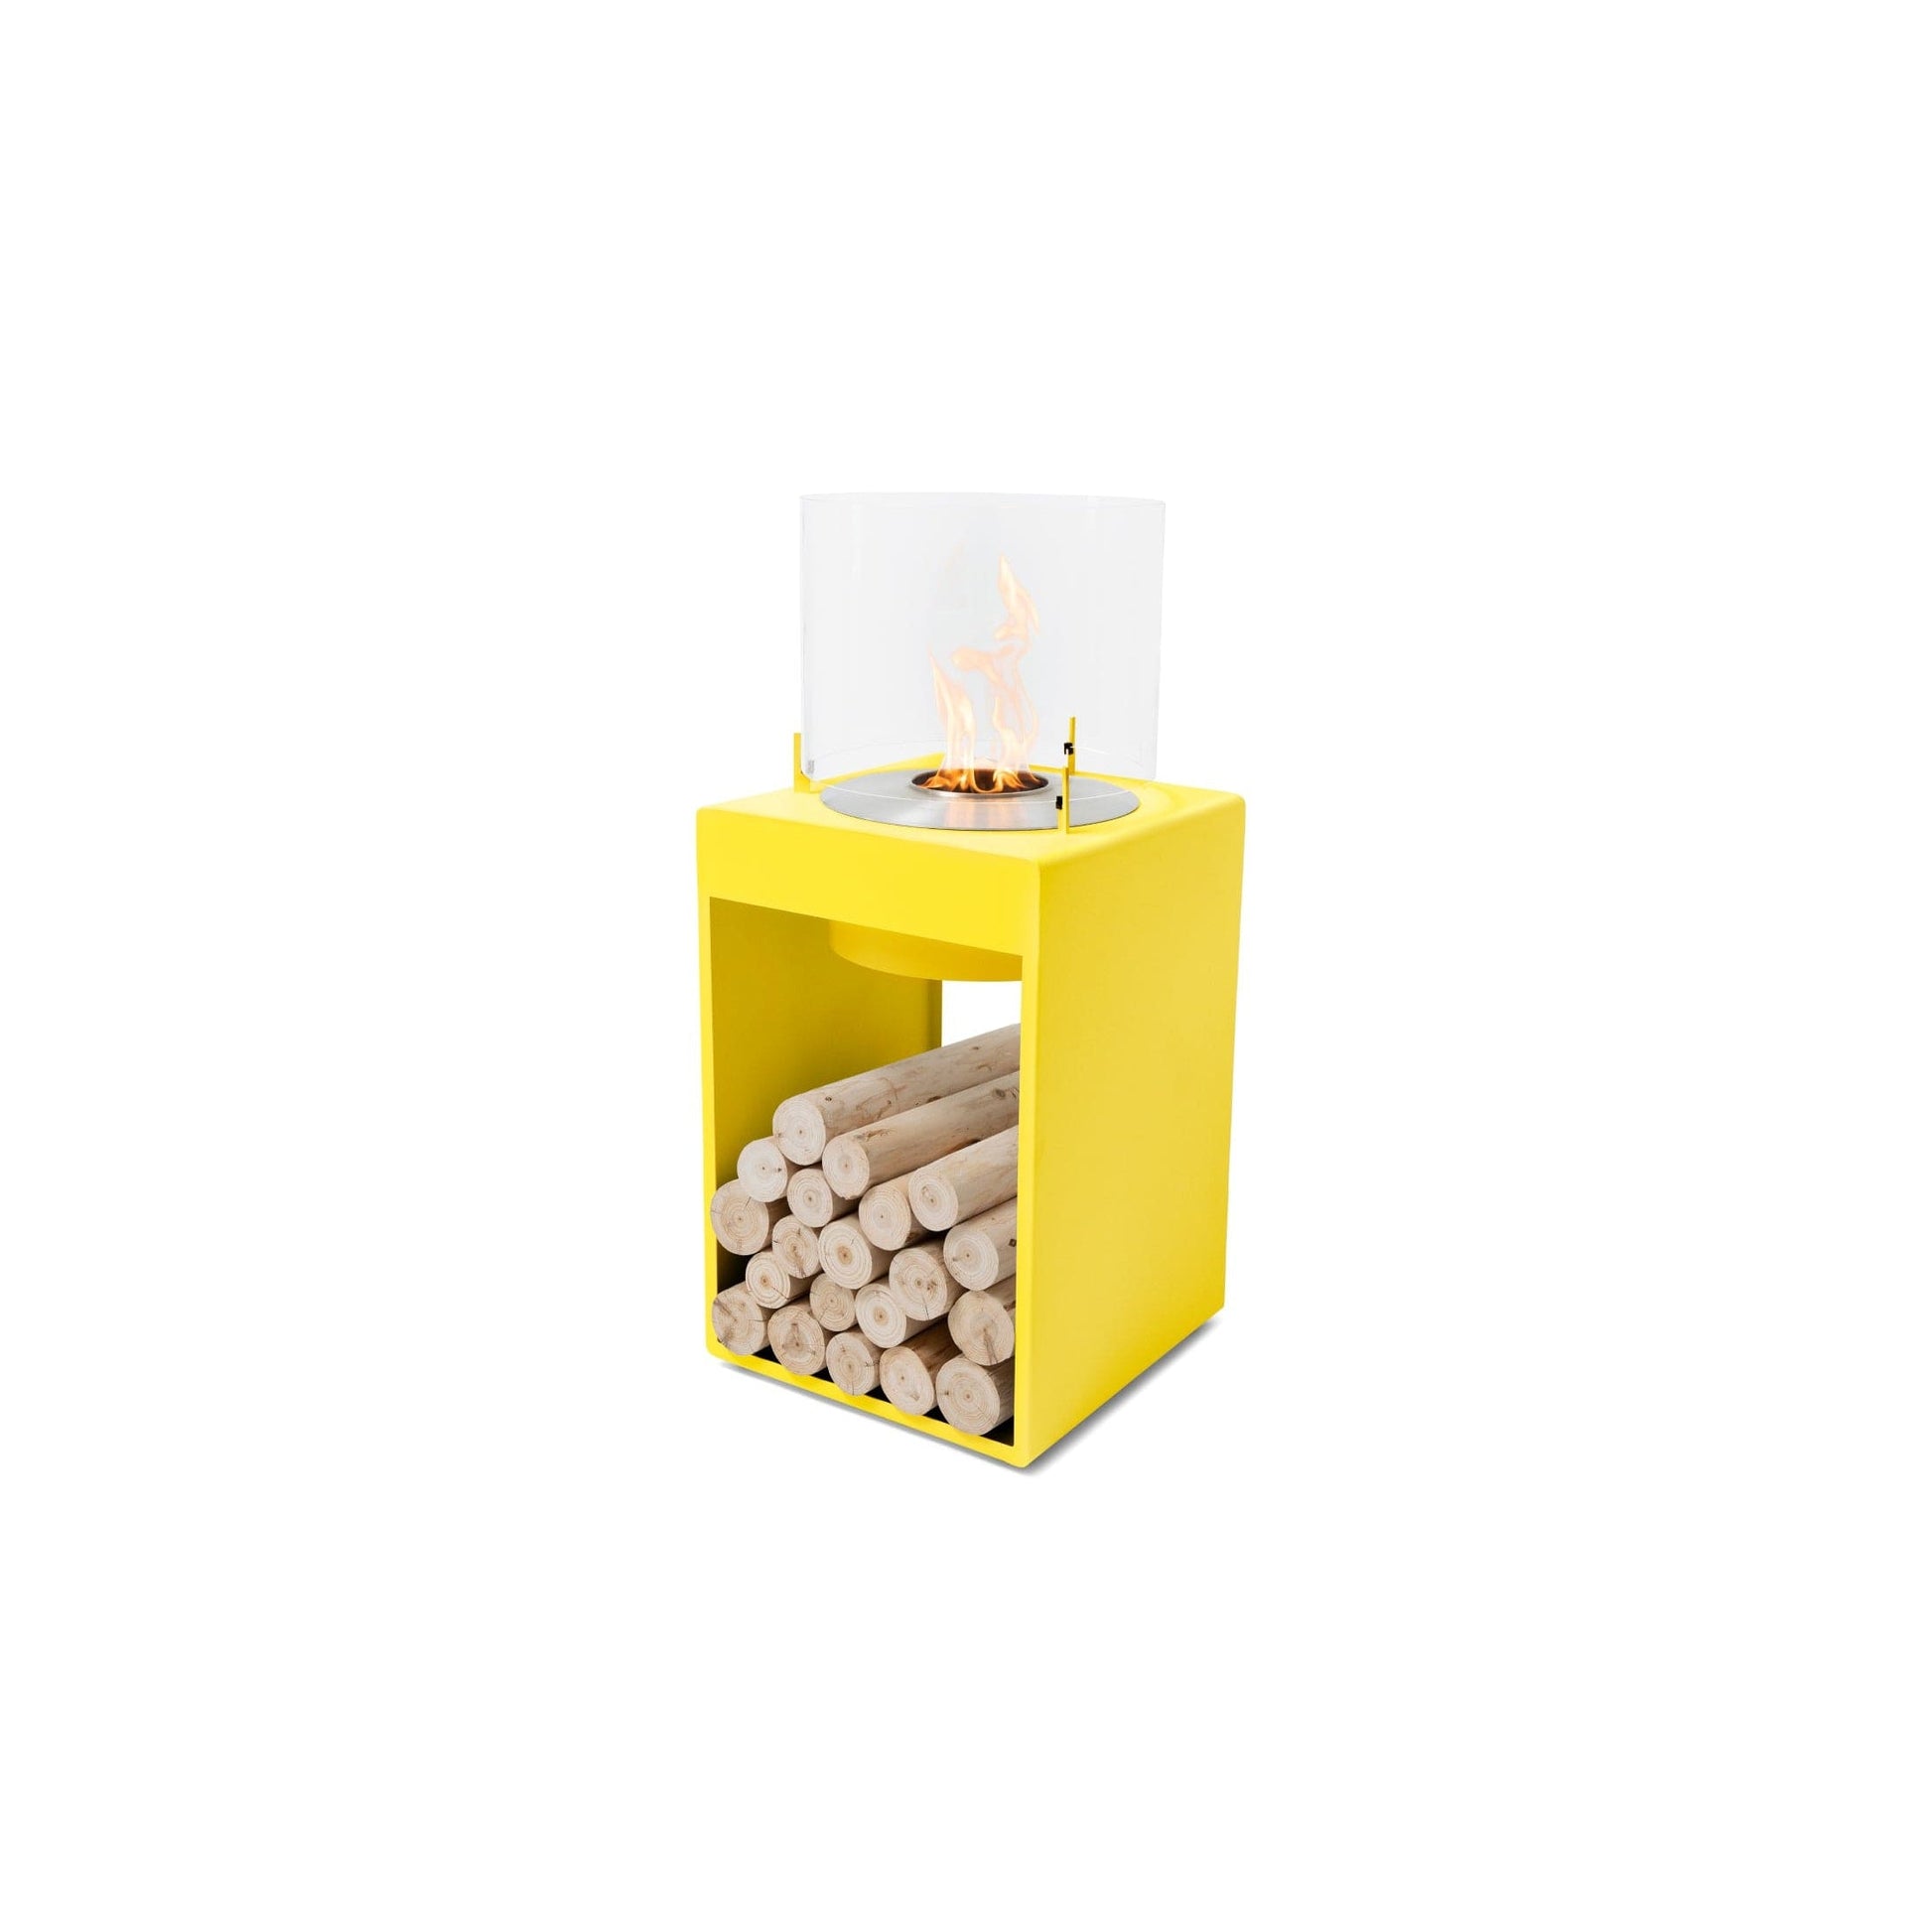 EcoSmart Fire POP 8T 39" Yellow Freestanding Designer Fireplace with Stainless Steel Burner by MAD Design Group